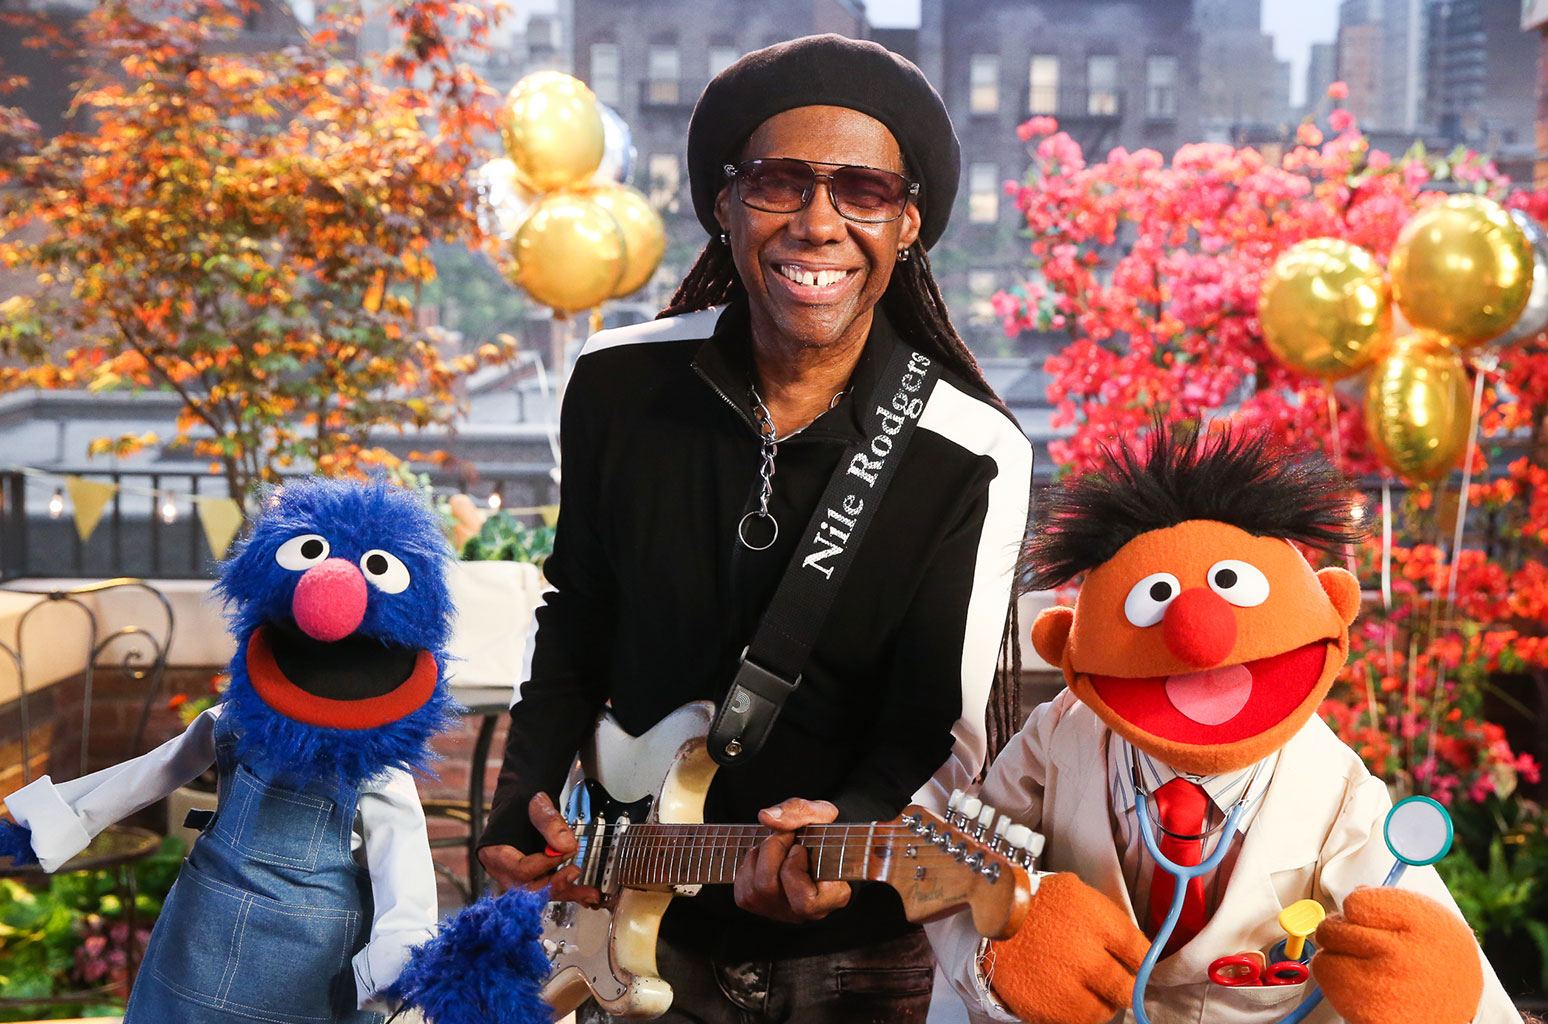 7 surprising facts you might not know about 'Sesame Street' - National